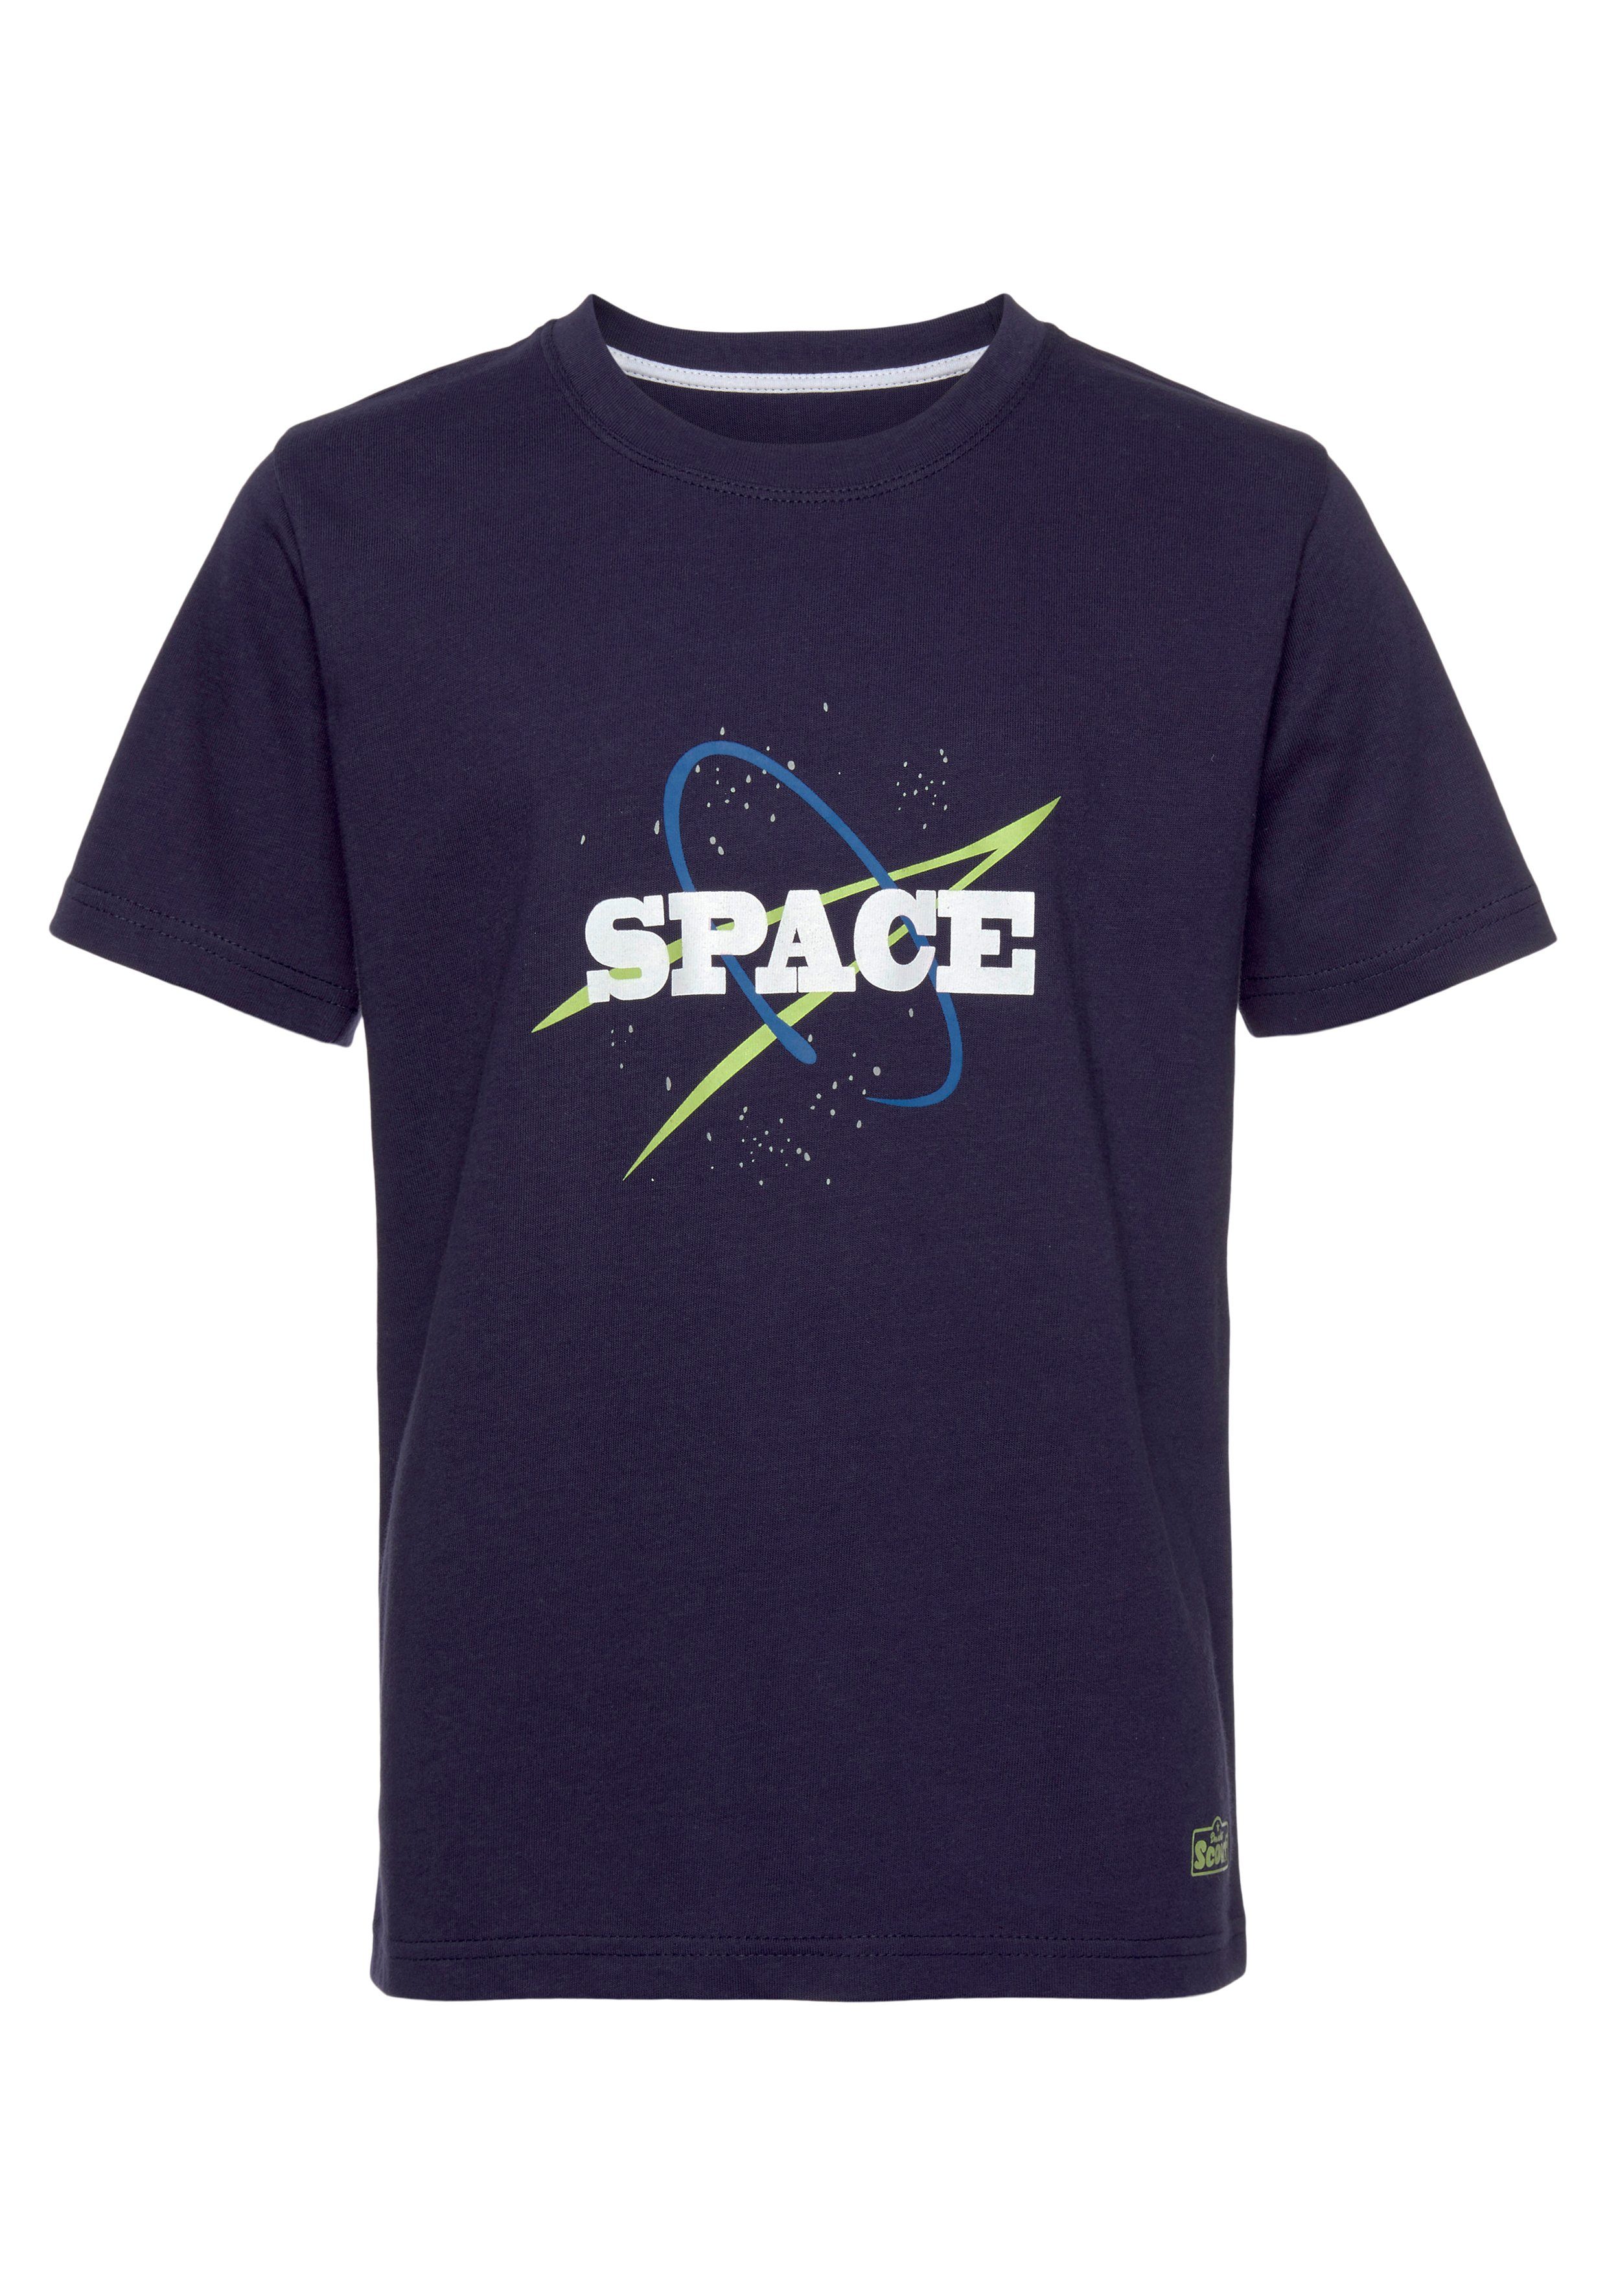 aus (Packung, 2er-Pack) Scout Bio-Baumwolle SPACE T-Shirt